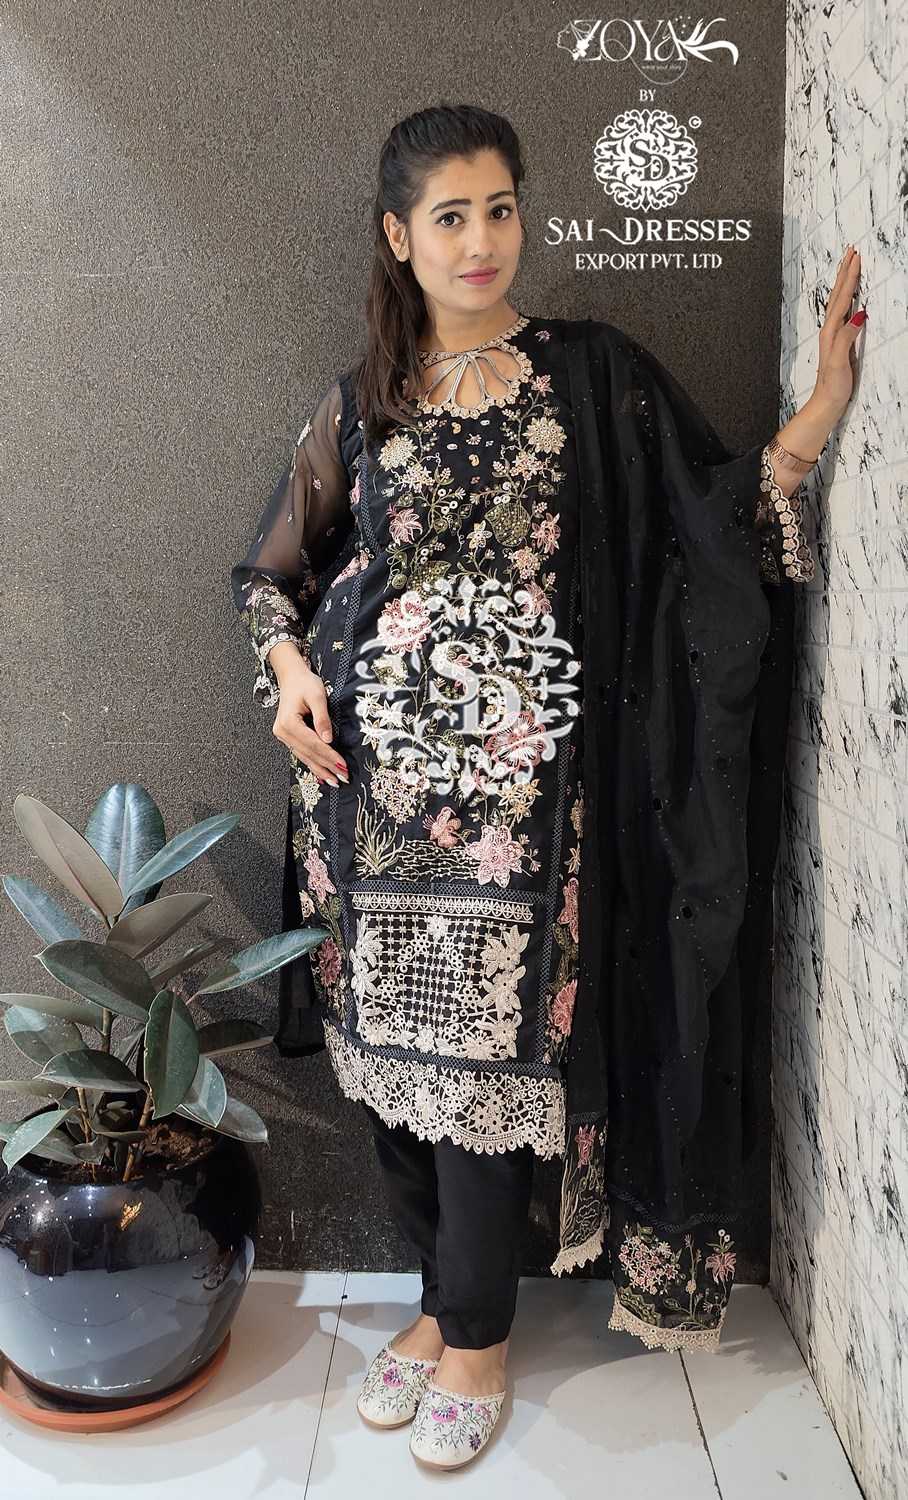 SAI DRESSES PRESENT D.NO SD1088 TO SD1090 READY TO EXCLUSIVE PARTY WEAR DESIGNER PAKISTANI 3 PIECE CONCEPT COMBO COLLECTION IN WHOLESALE RATE IN SURAT